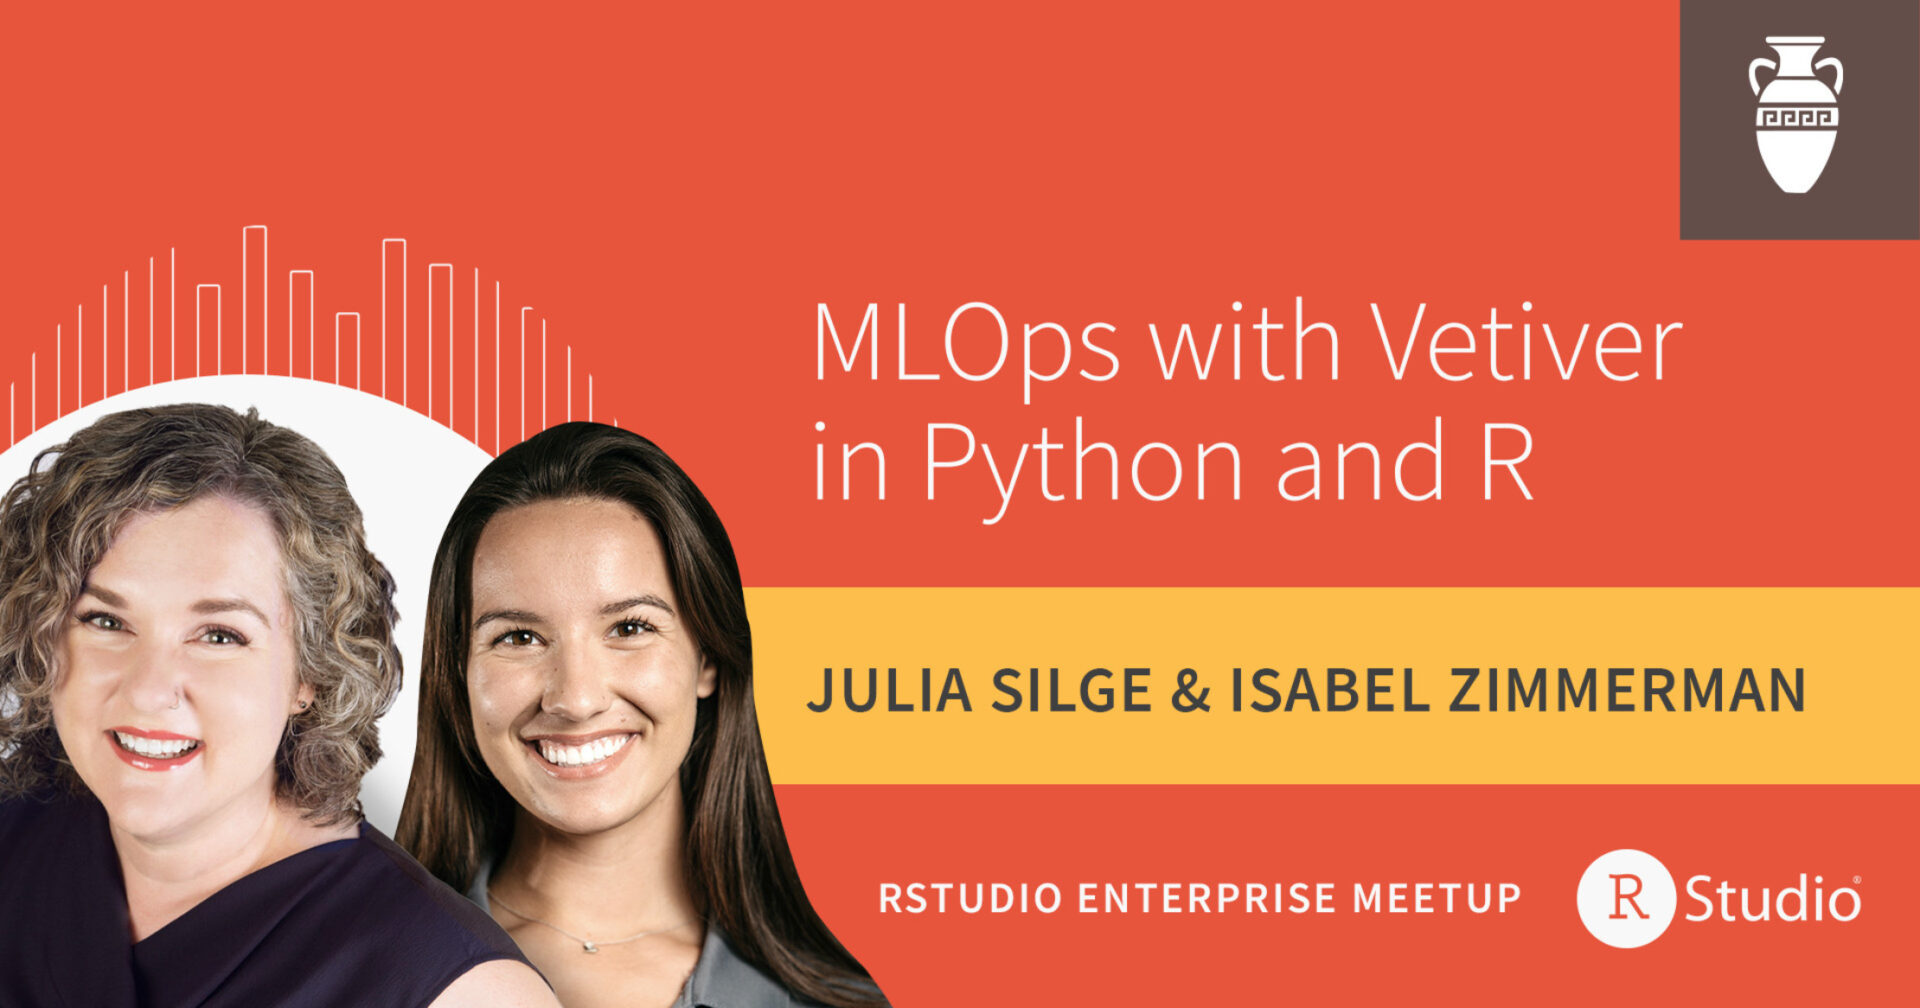 An image of Julia Silge and Isabel Zimmerman. The text says MLOps with Vetiver in Python and R, Julia Silge & Isabel Zimmerman, RStudio Enterprise Meetup. The RStudio logo is in the lower right-hand corner and the amphora icon is in the top right-hand corner.